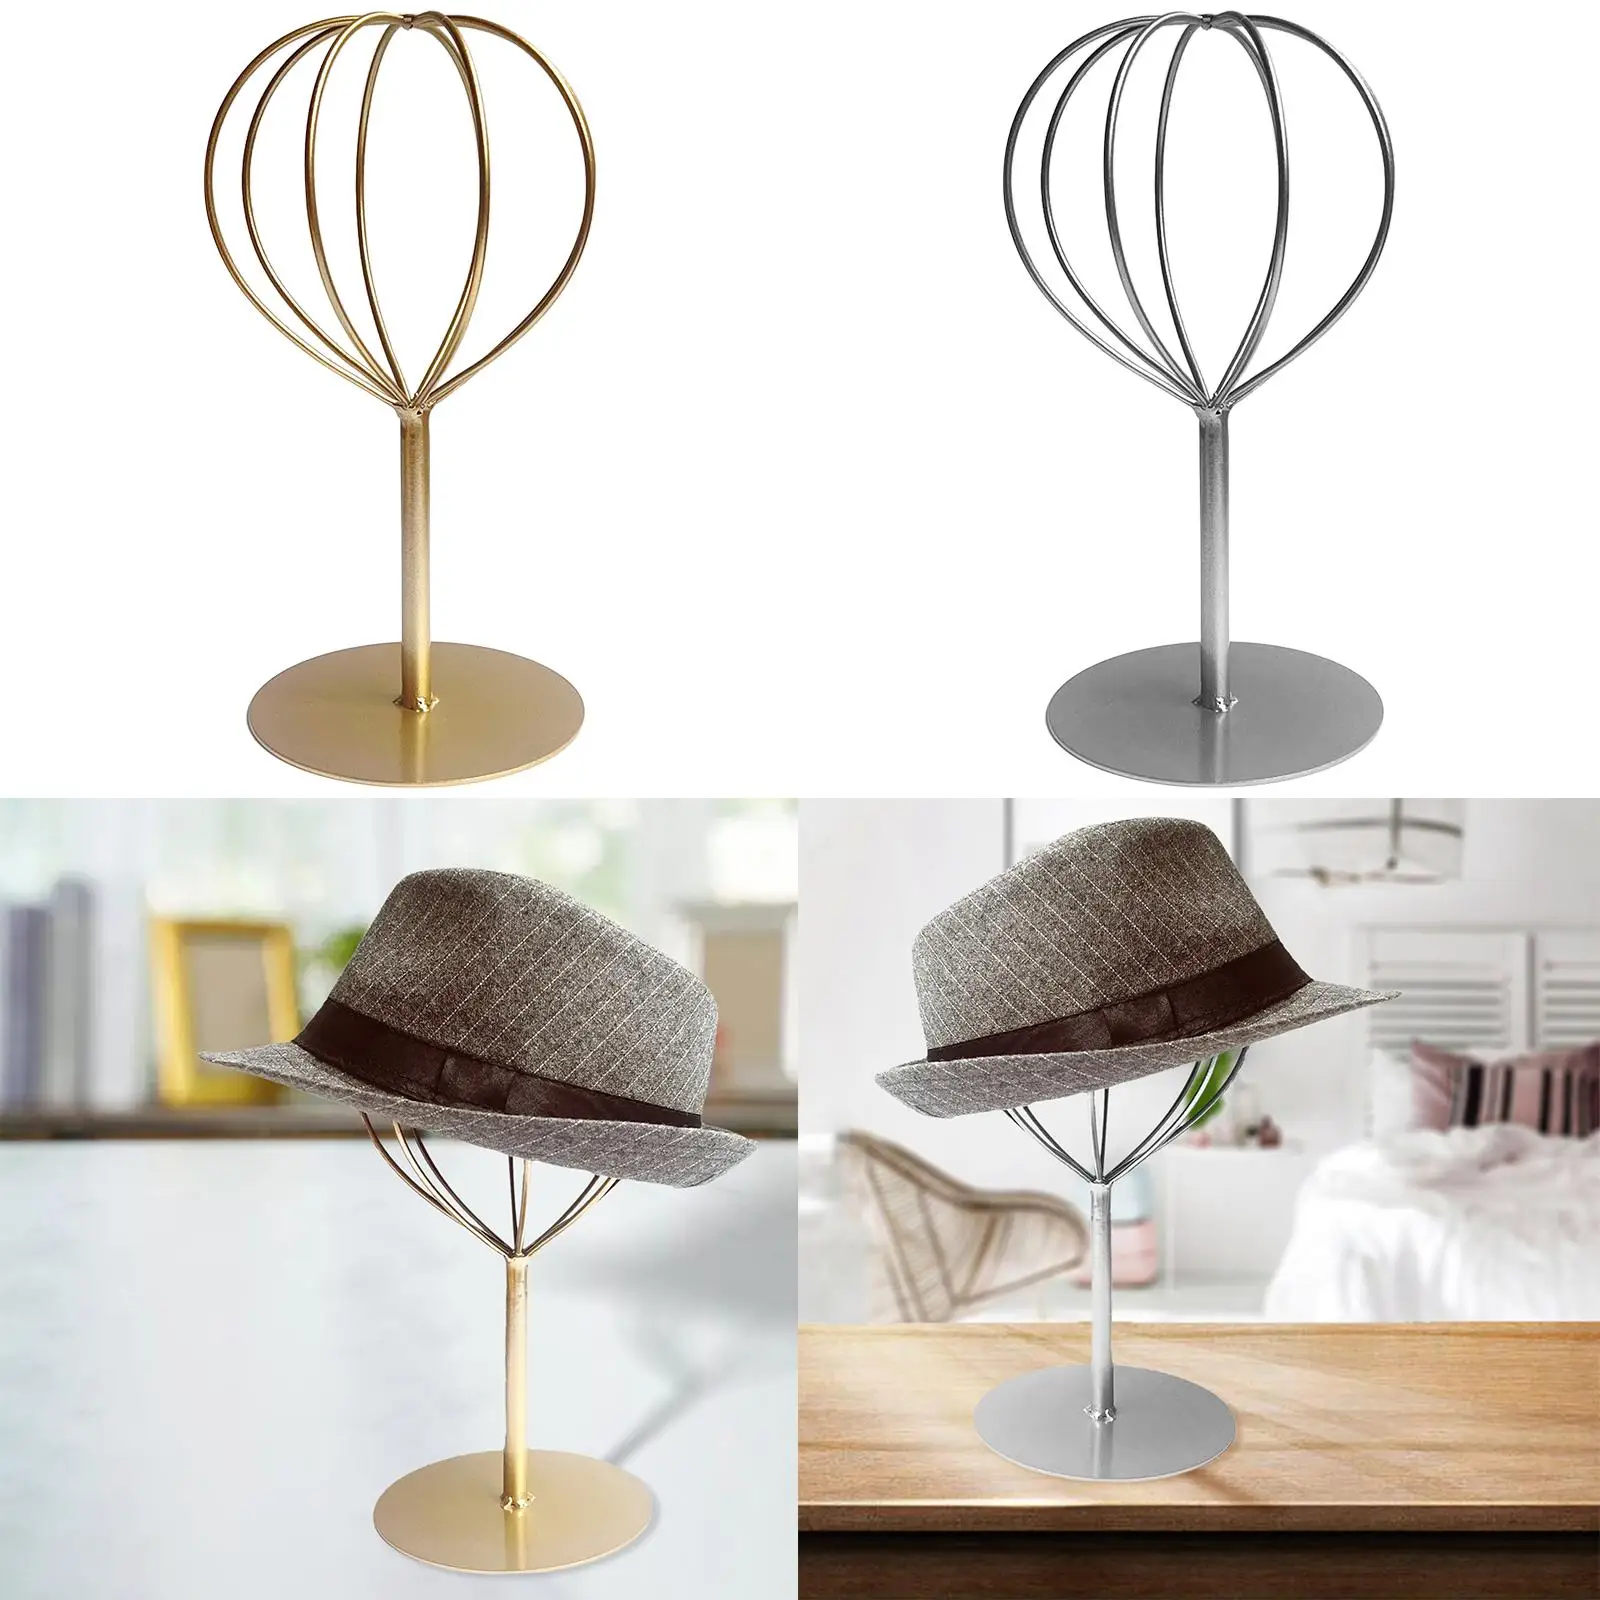 Wig Display Stand Iron Balloon Shape Hollowed Out Freestanding Stable Wig Dryer Stands Hat Stand Display Holder Rack for Display